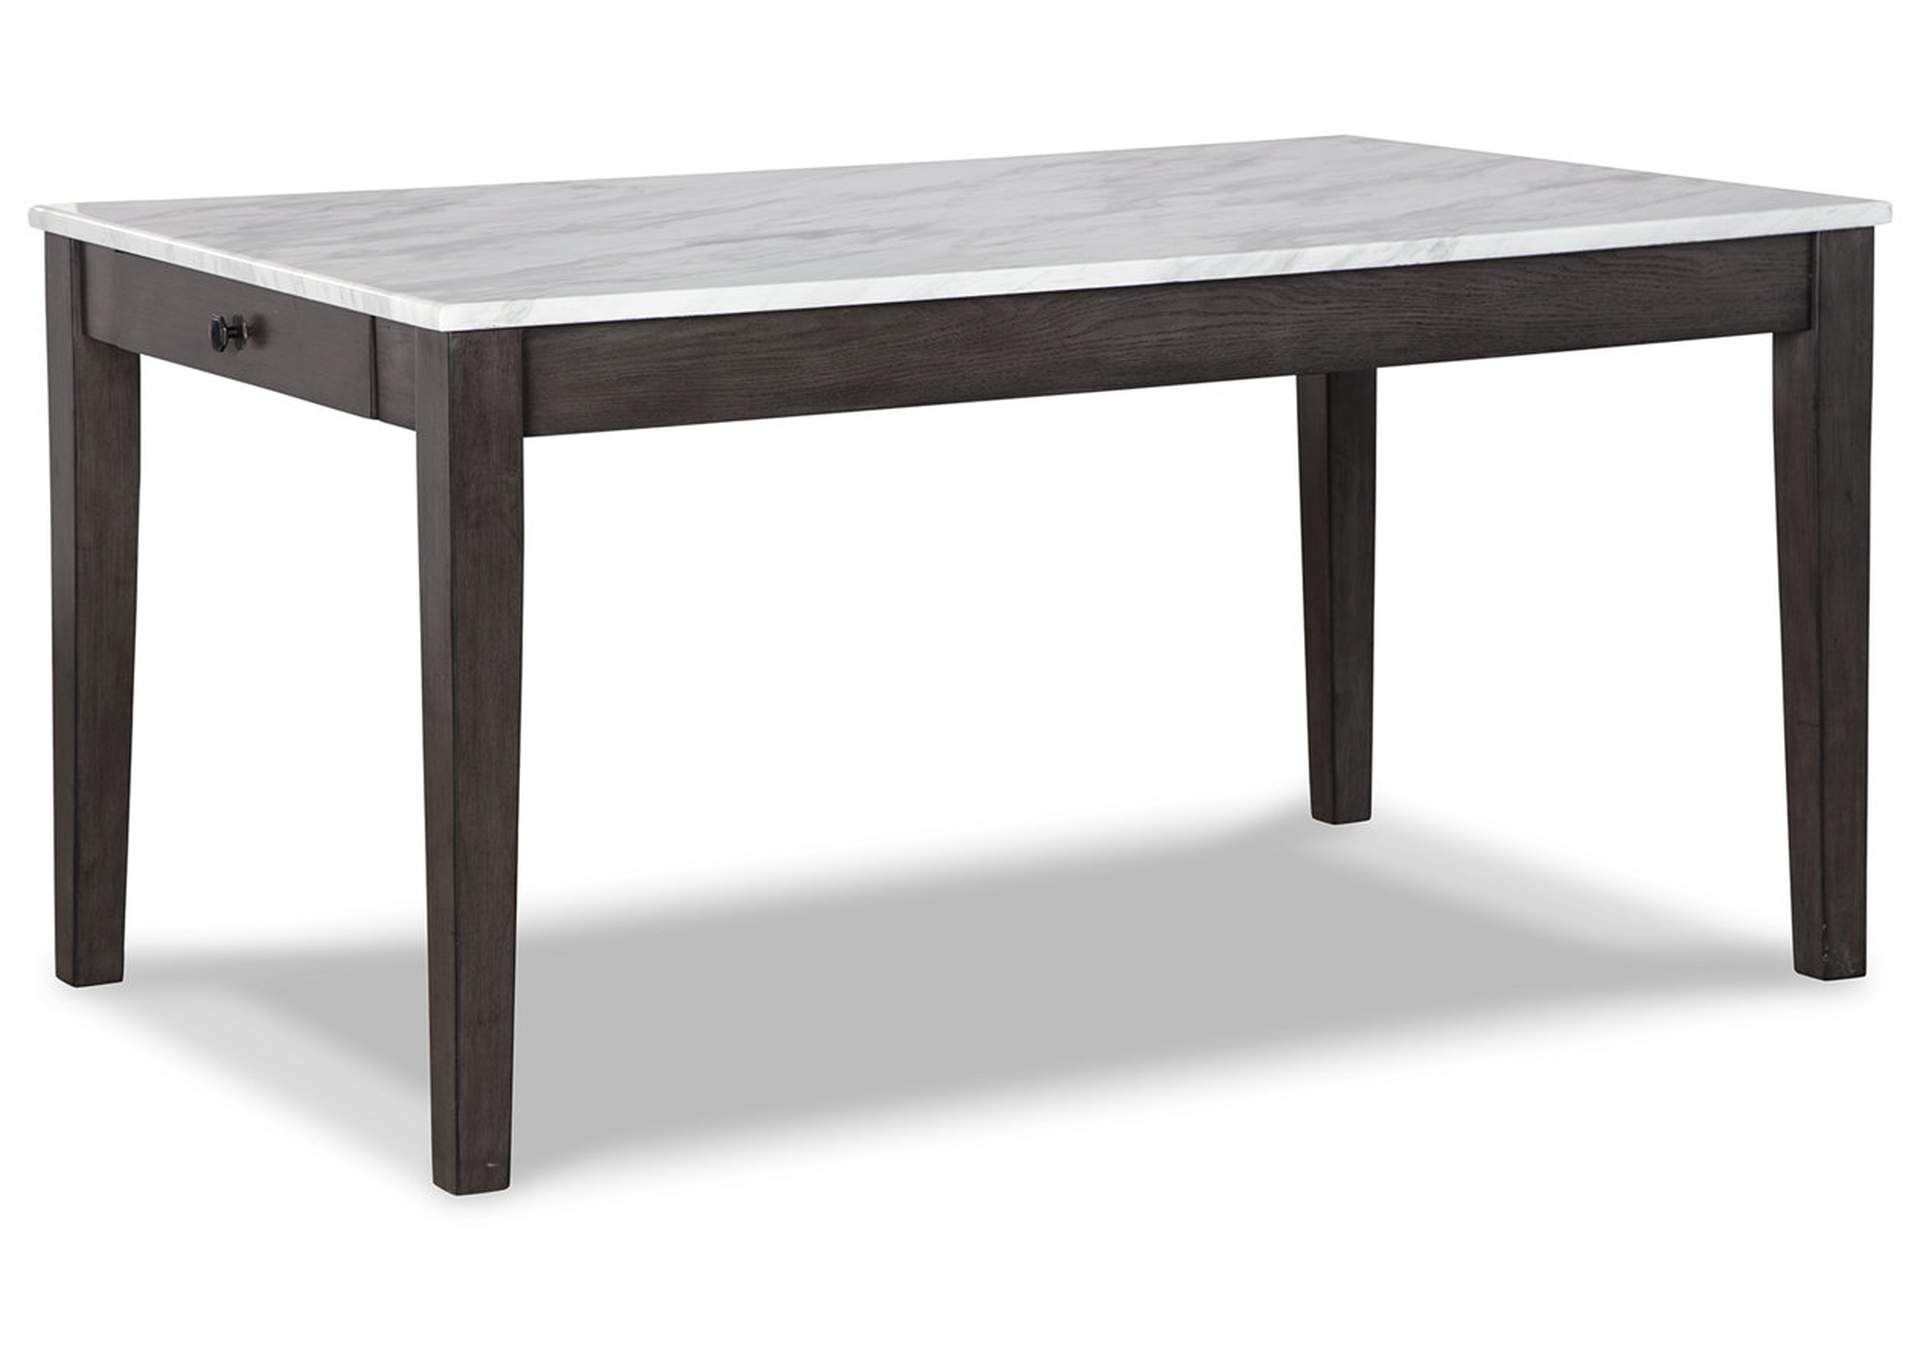 Luvoni Dining Table,Benchcraft